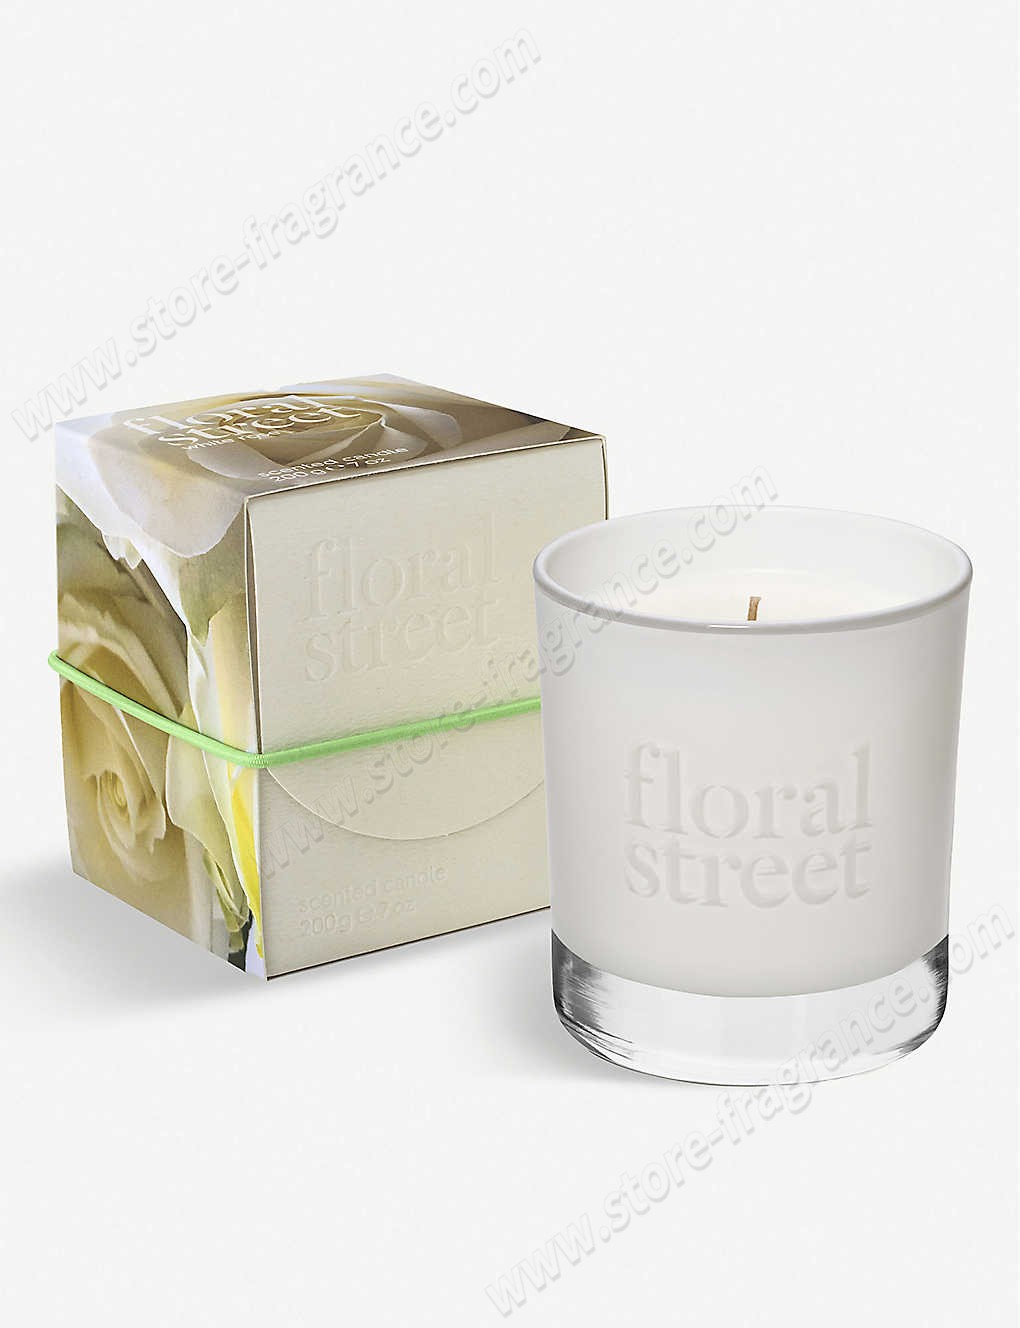 FLORAL STREET/White Rose scented candle 200g ✿ Discount Store - -1